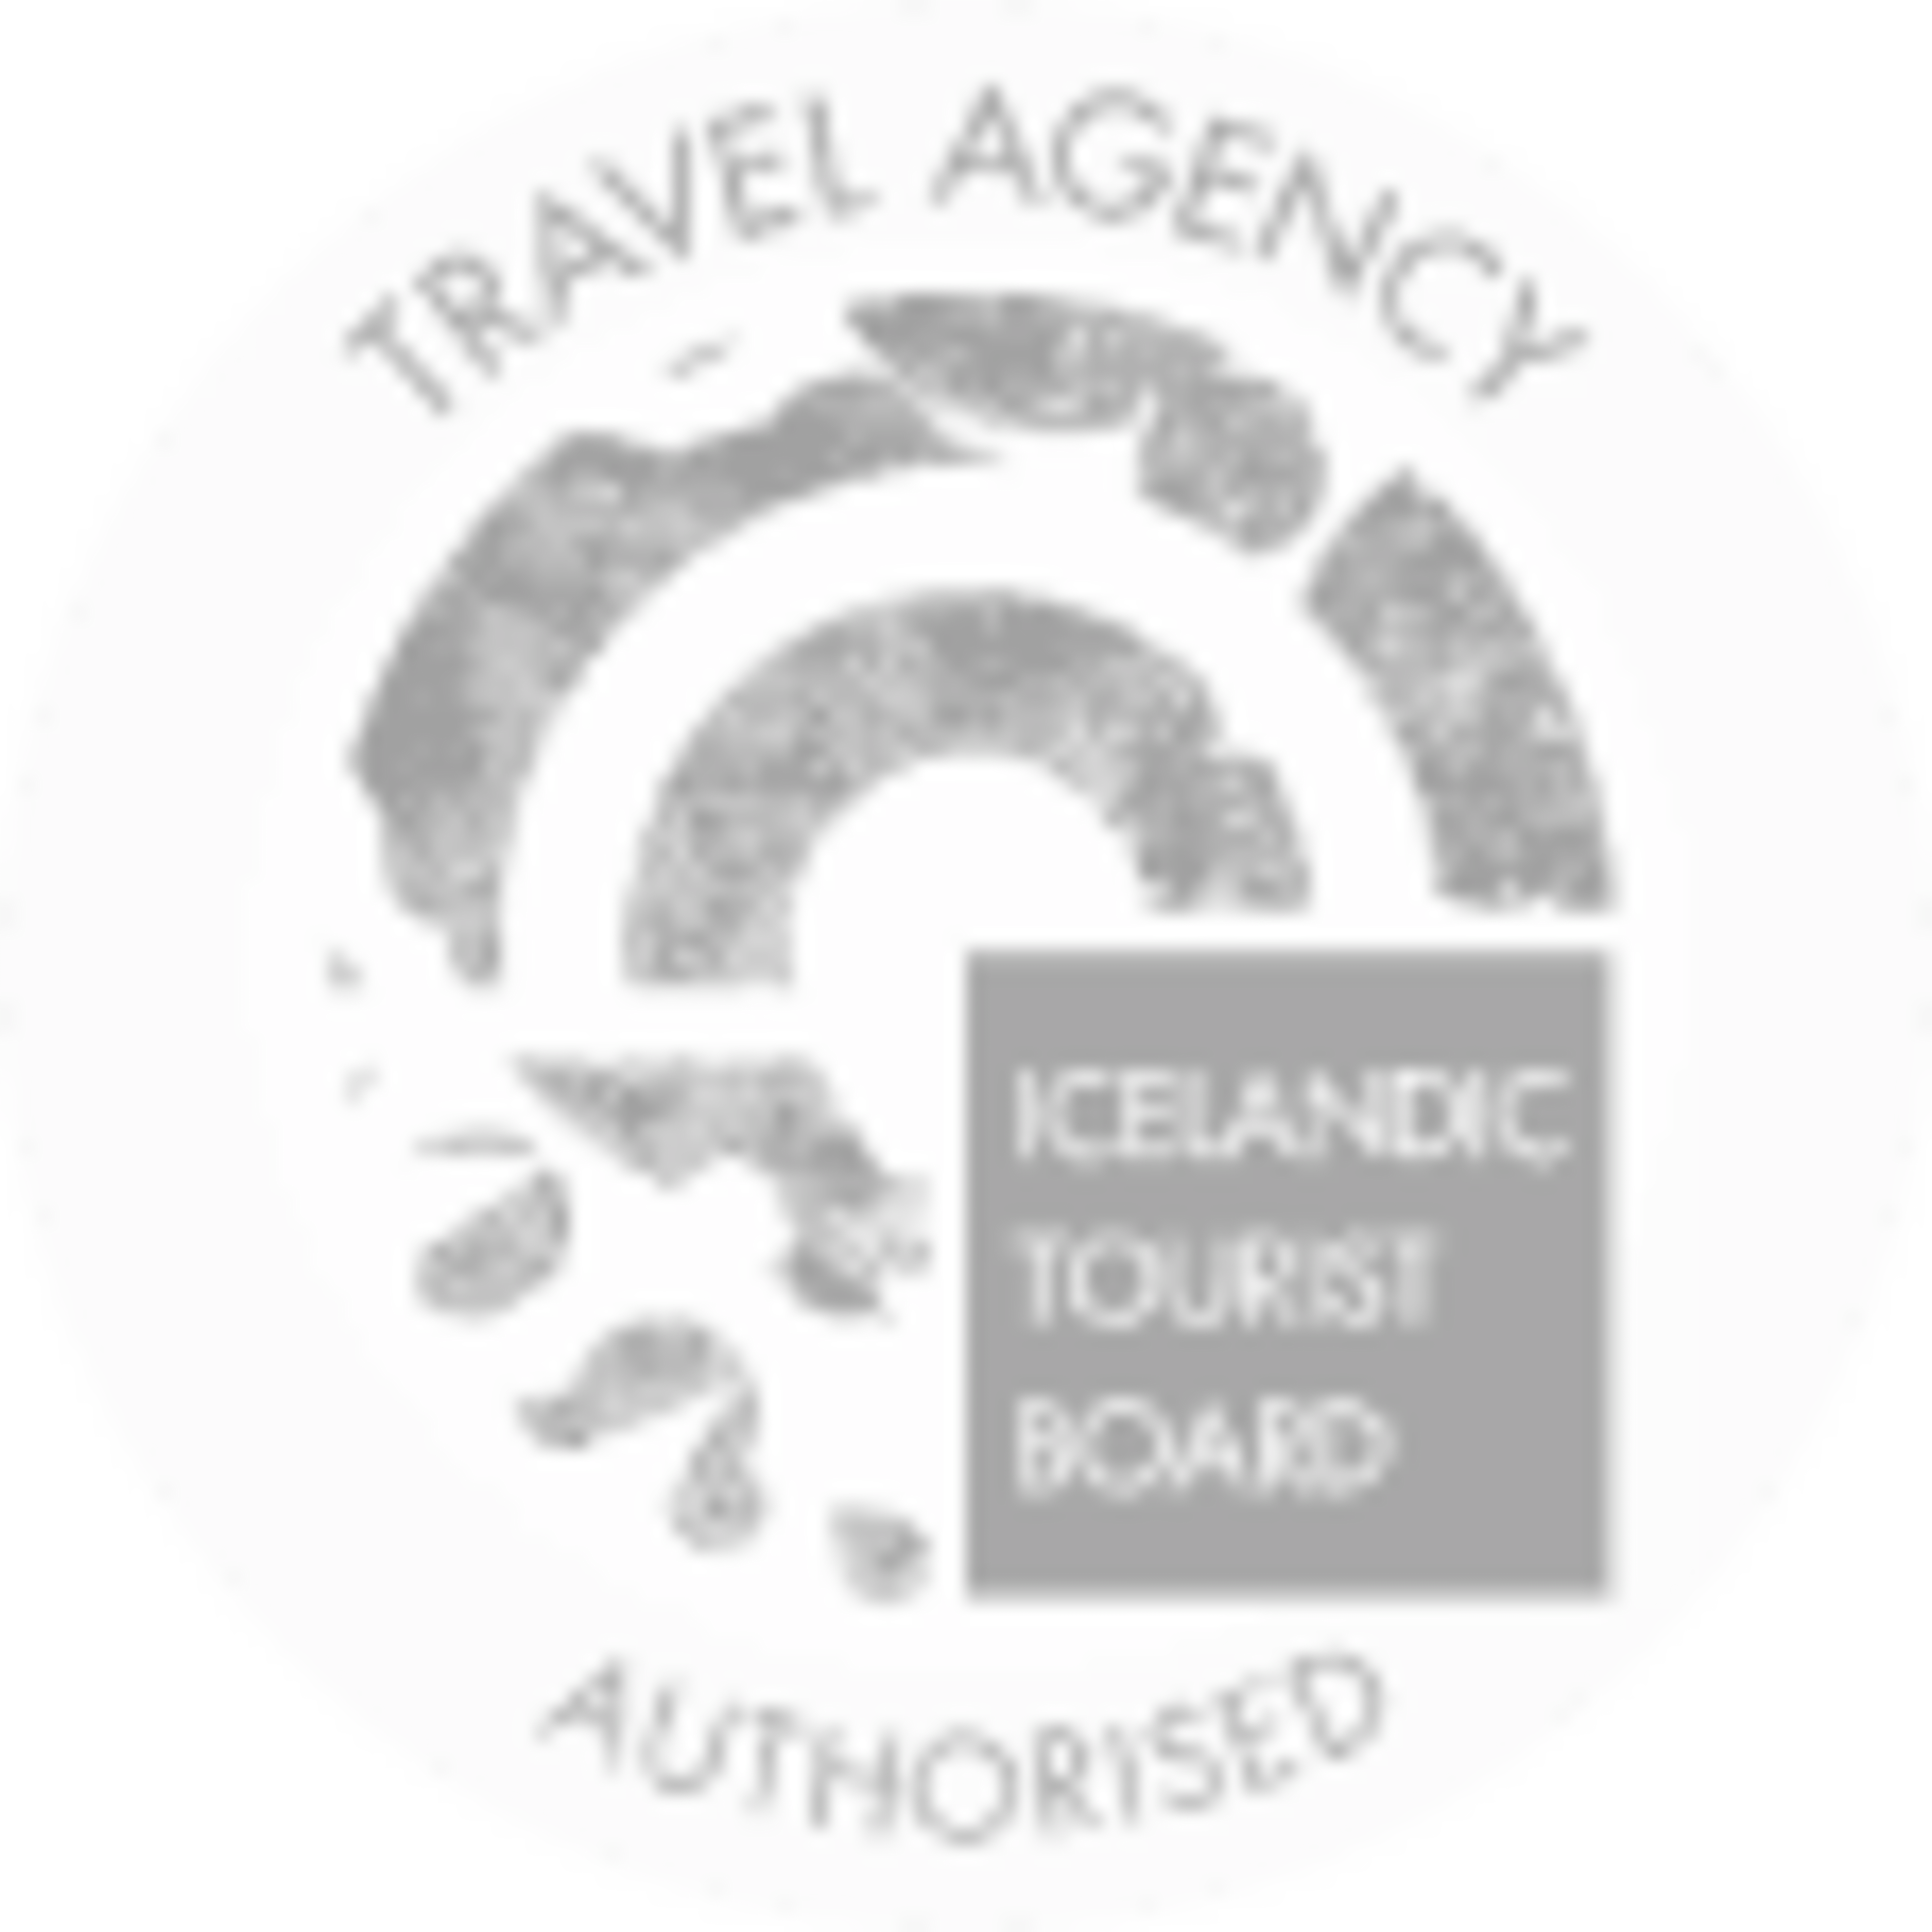 Government of Iceland Icelandic Tourist Board authorized Travel Agency